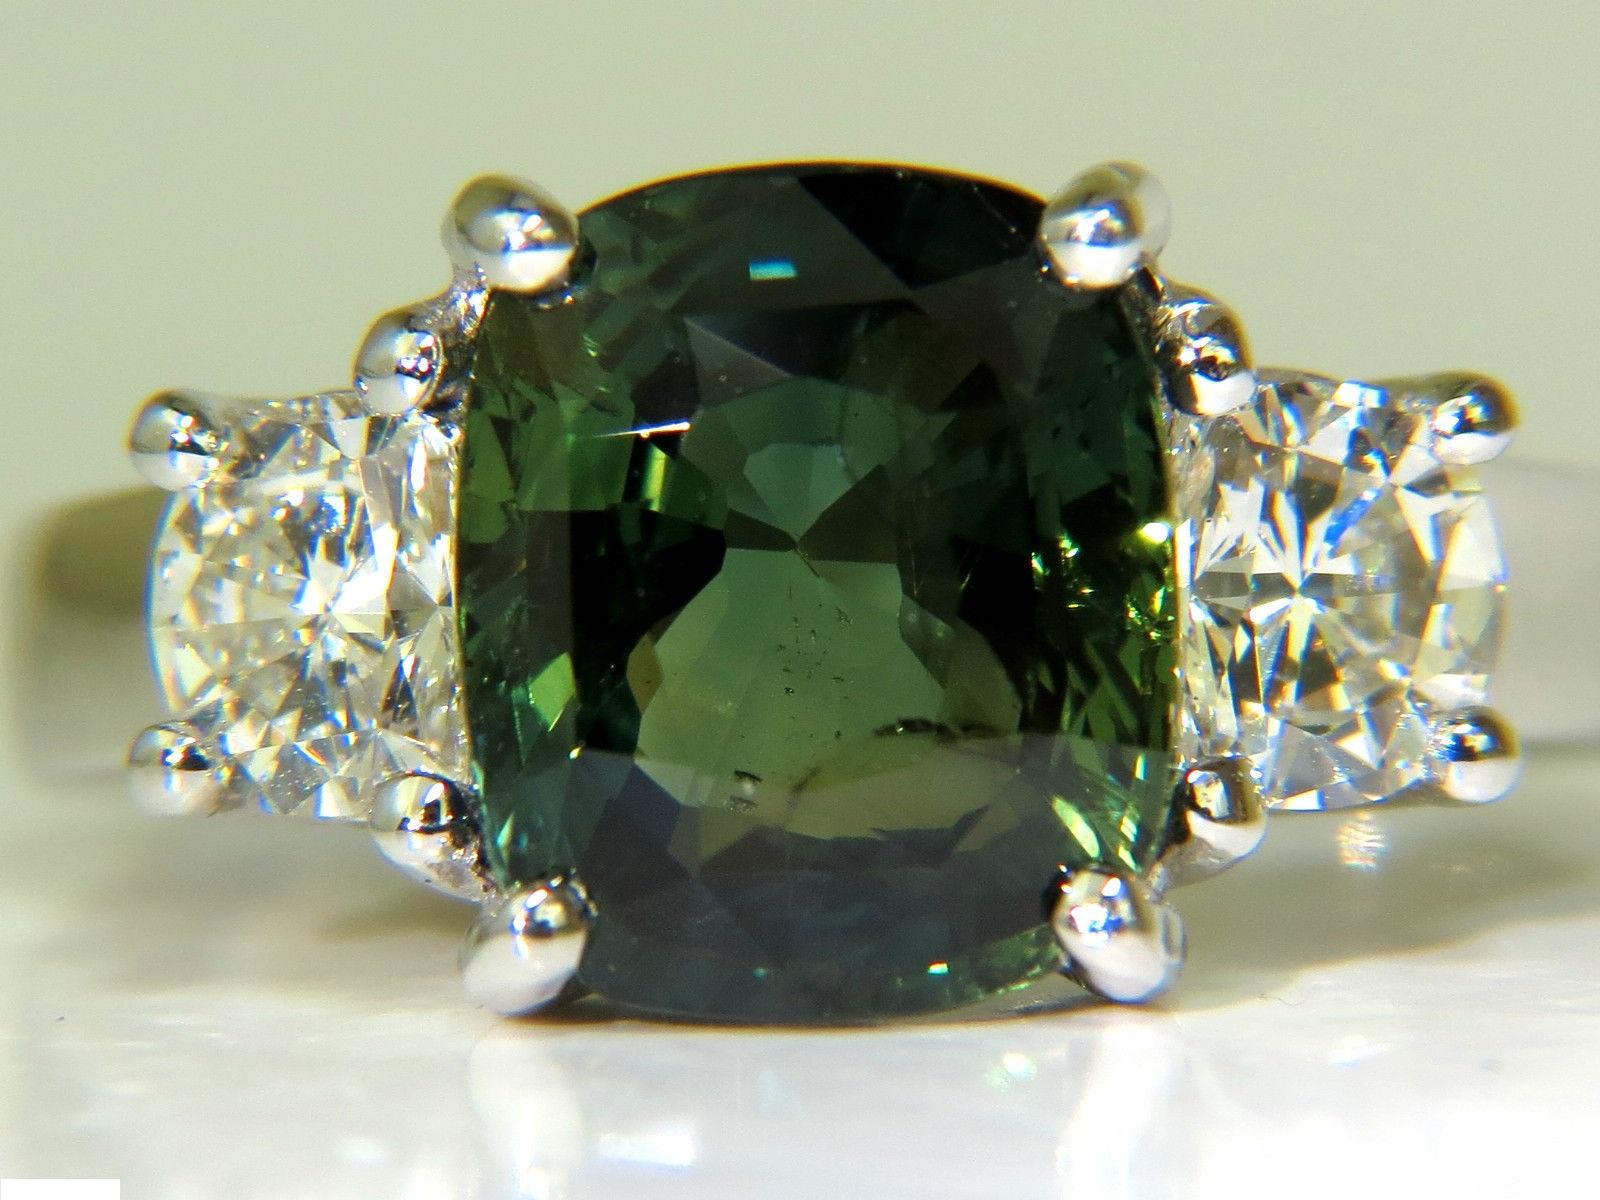 5.56ct. GIC certified Natural Sapphire
Amazing Rectangular Cushion cut

Very Very Clean Clarity

Beautiful Green sparkles throughout

The classic Green color

10.57 X 8.89 X 5.79mm

Transparency A+

GIC: 